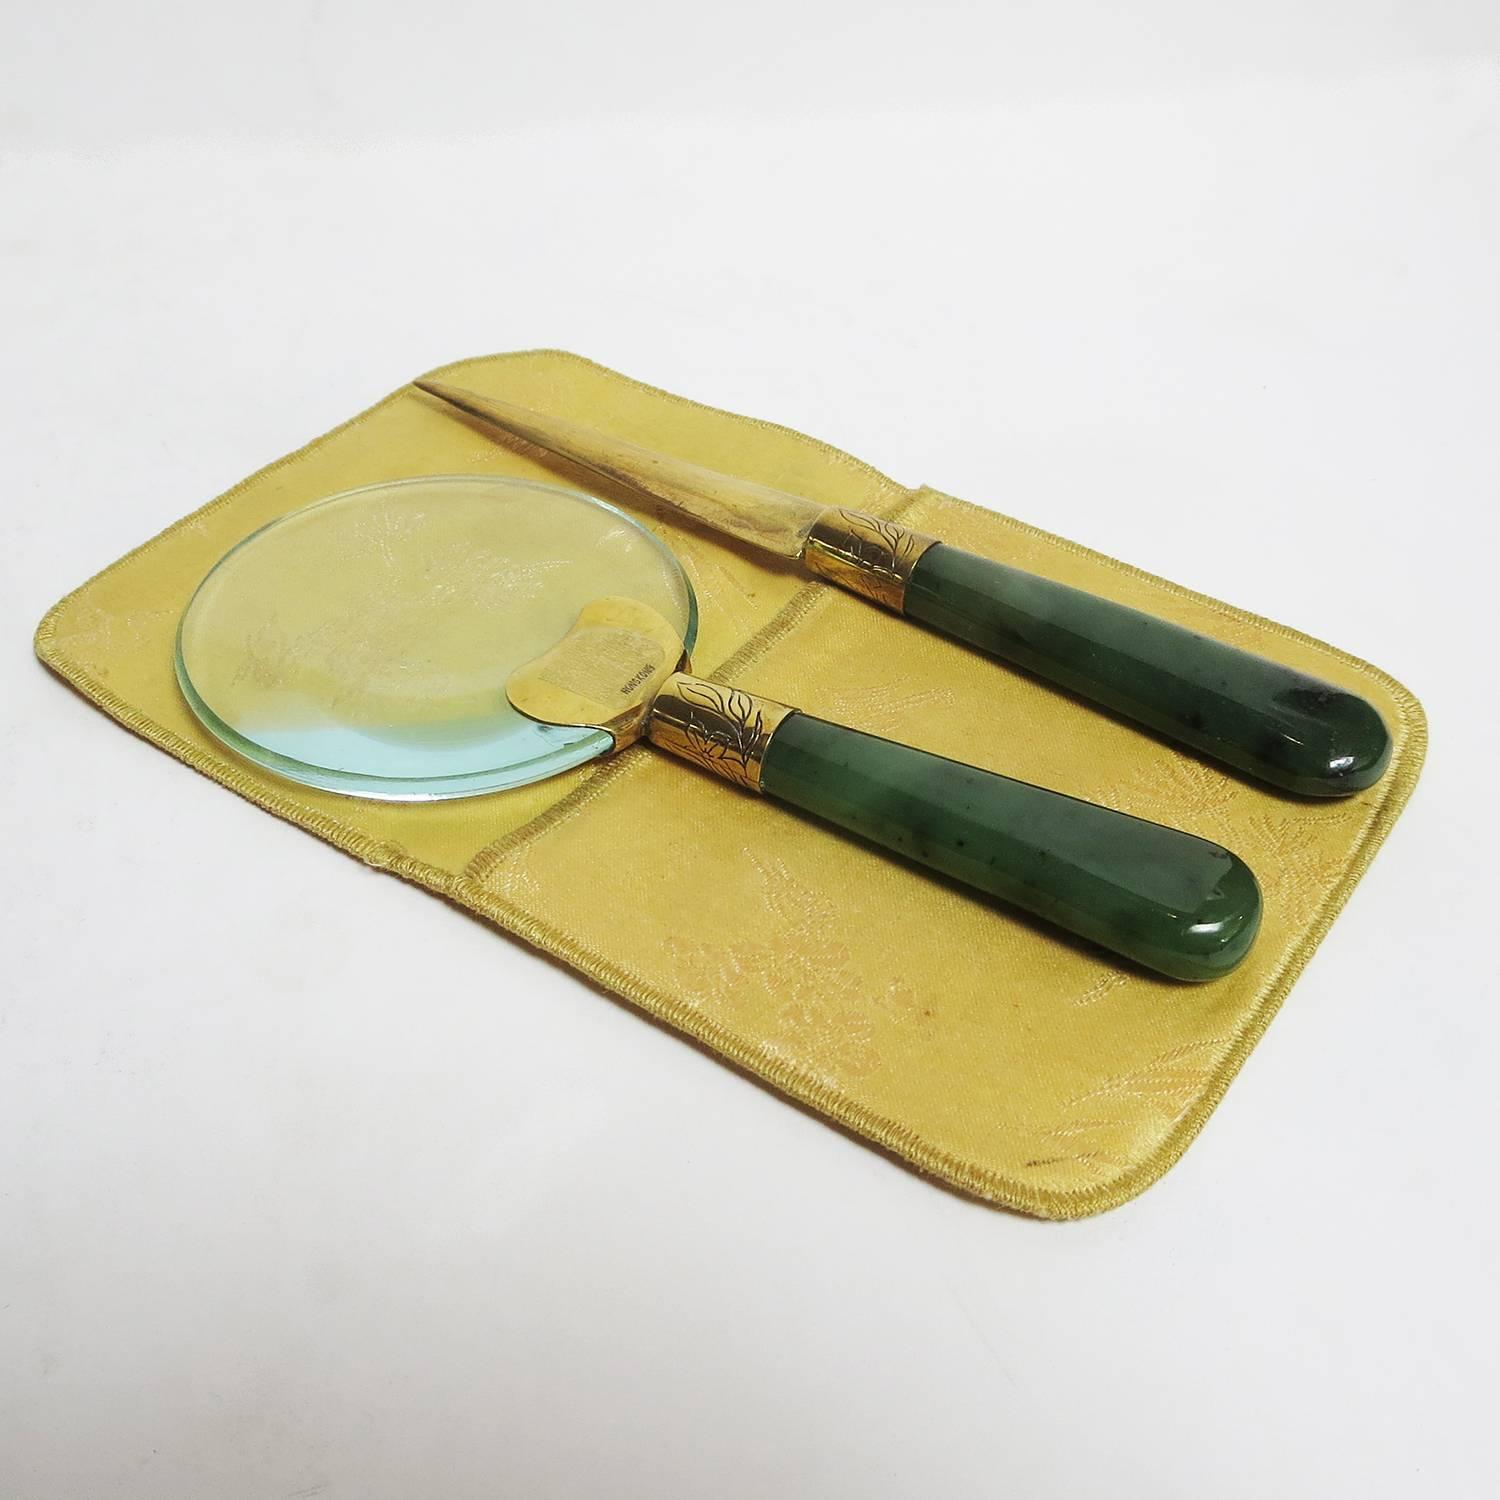 This charming set was made for and sold by Gumps store in San Francisco in the 1960's. The set consists of a glass magnifier and a letter opener, set in a Chinese silk envelope. Both are marked Hong Kong, and Gumps on the opener.